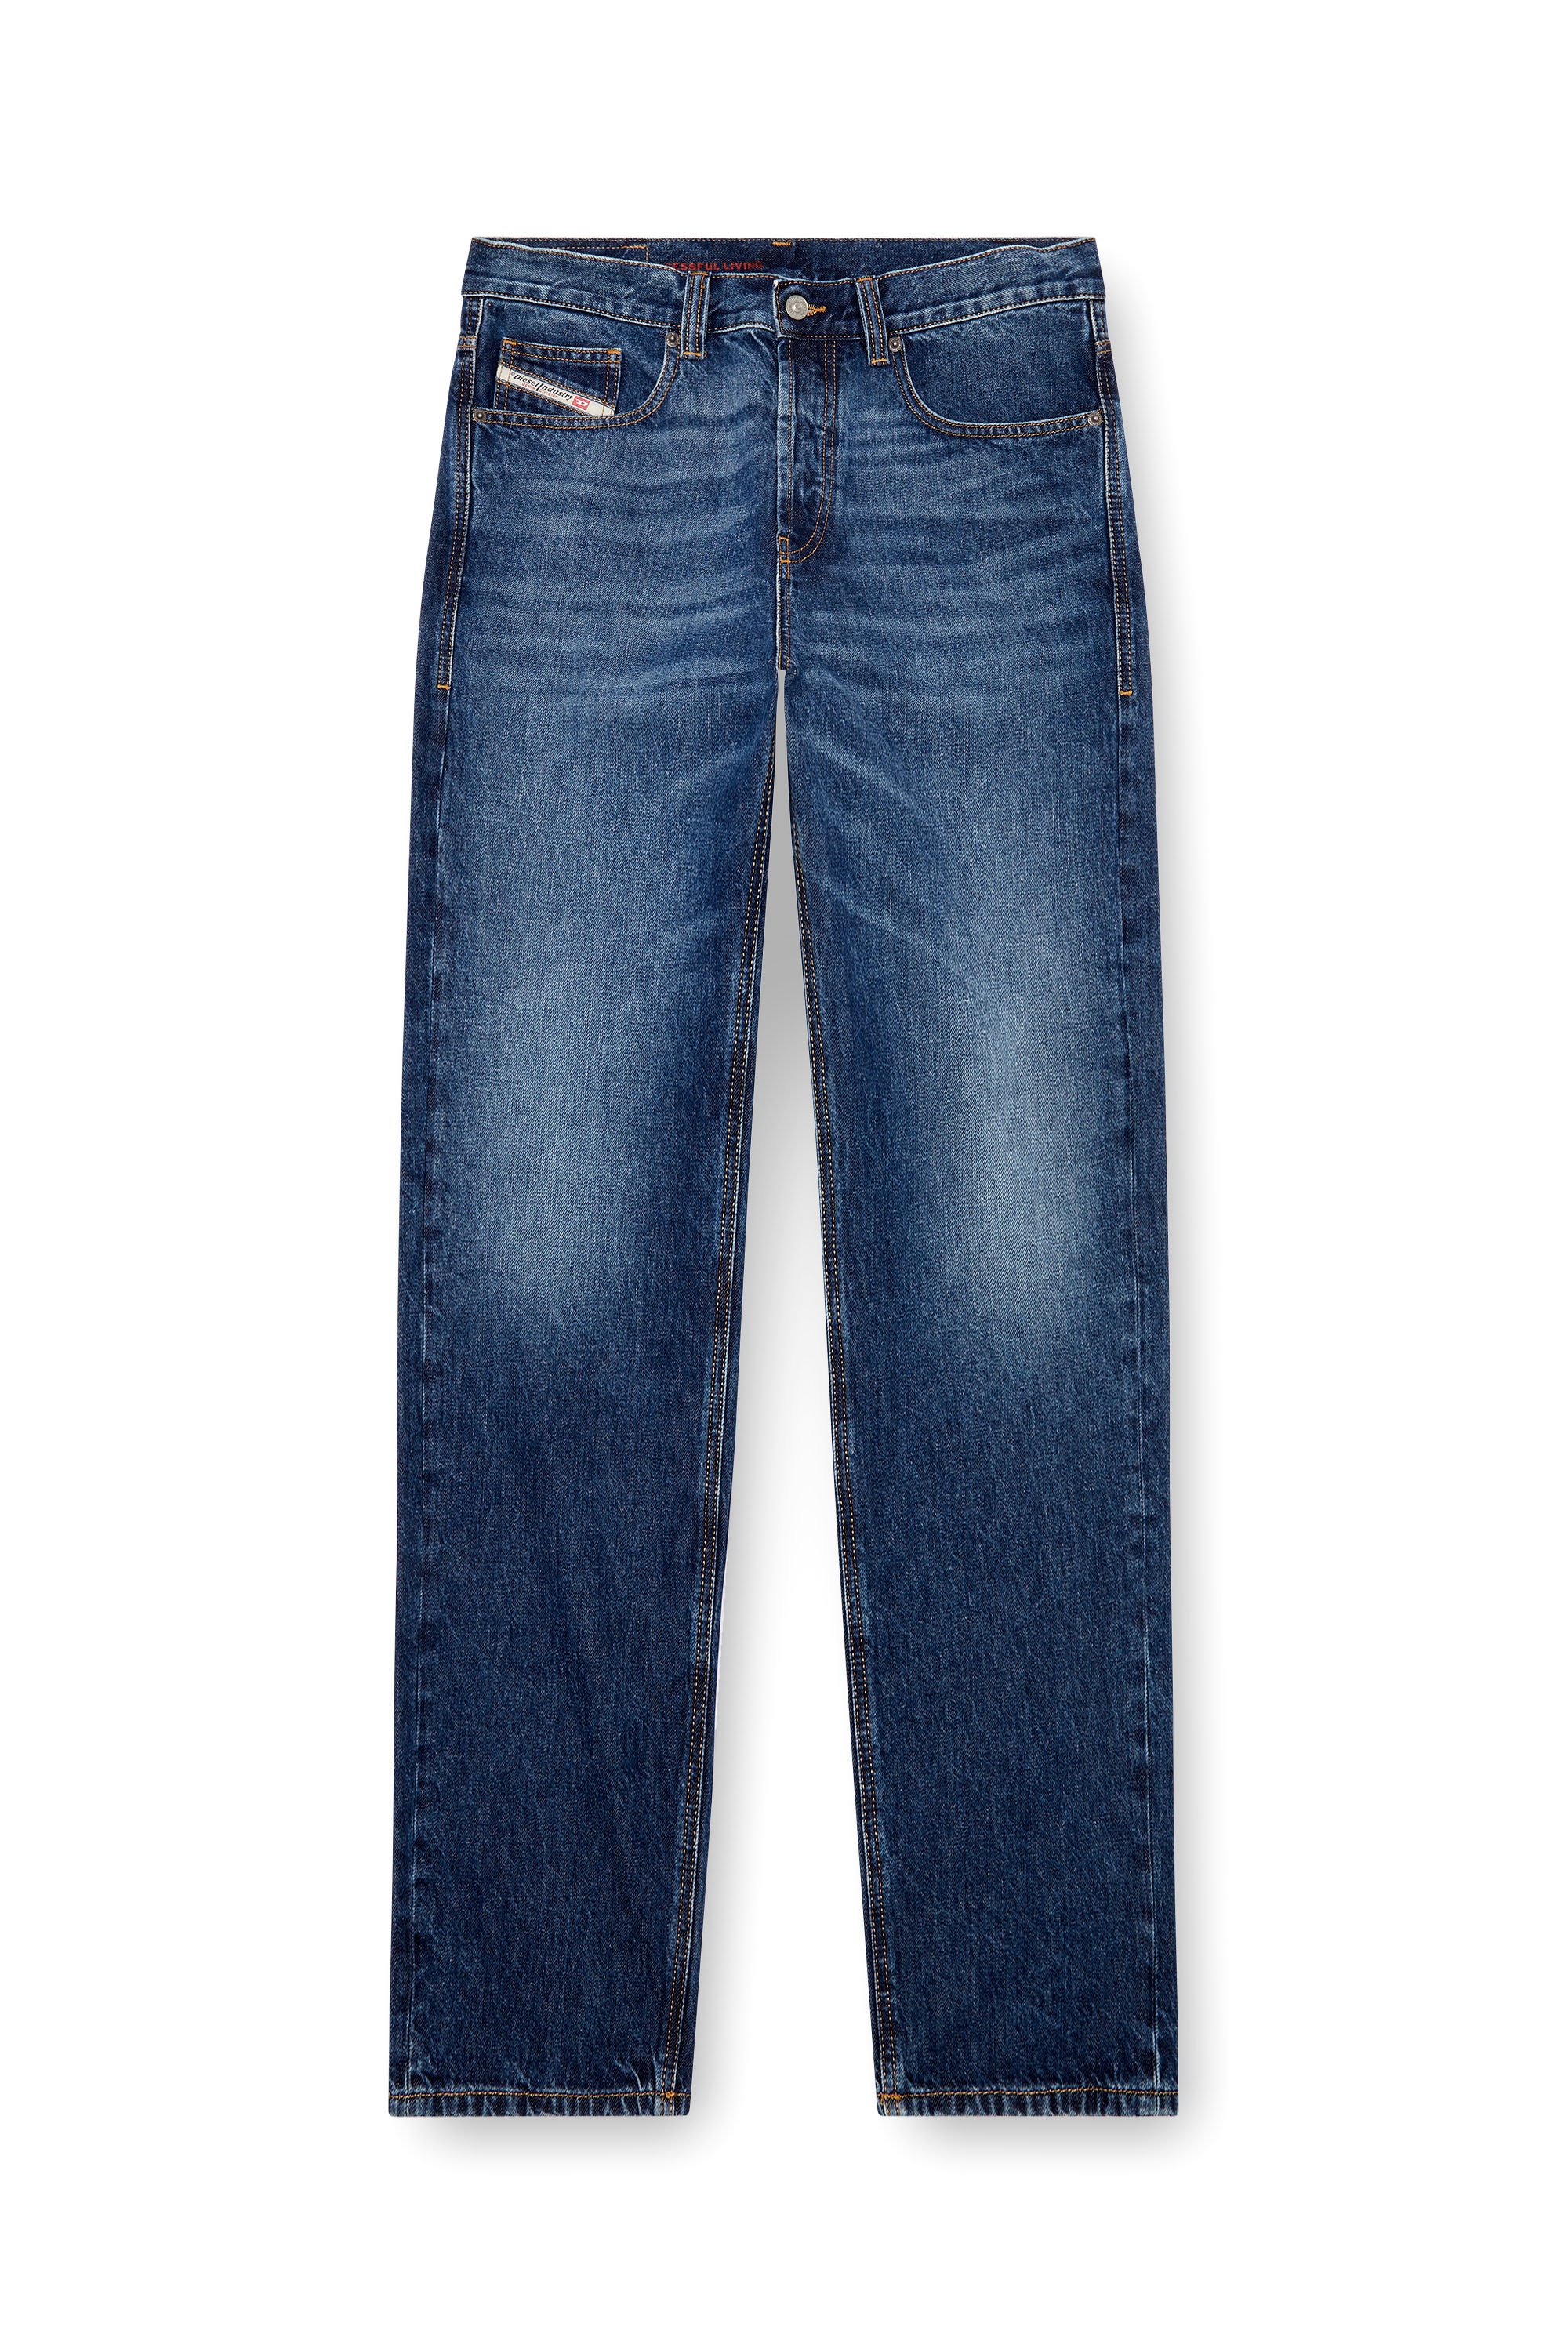 Diesel - Straight Jeans 2010 D-Macs 09I27, Hombre Straight Jeans - 2010 D-Macs in Azul marino - Image 3